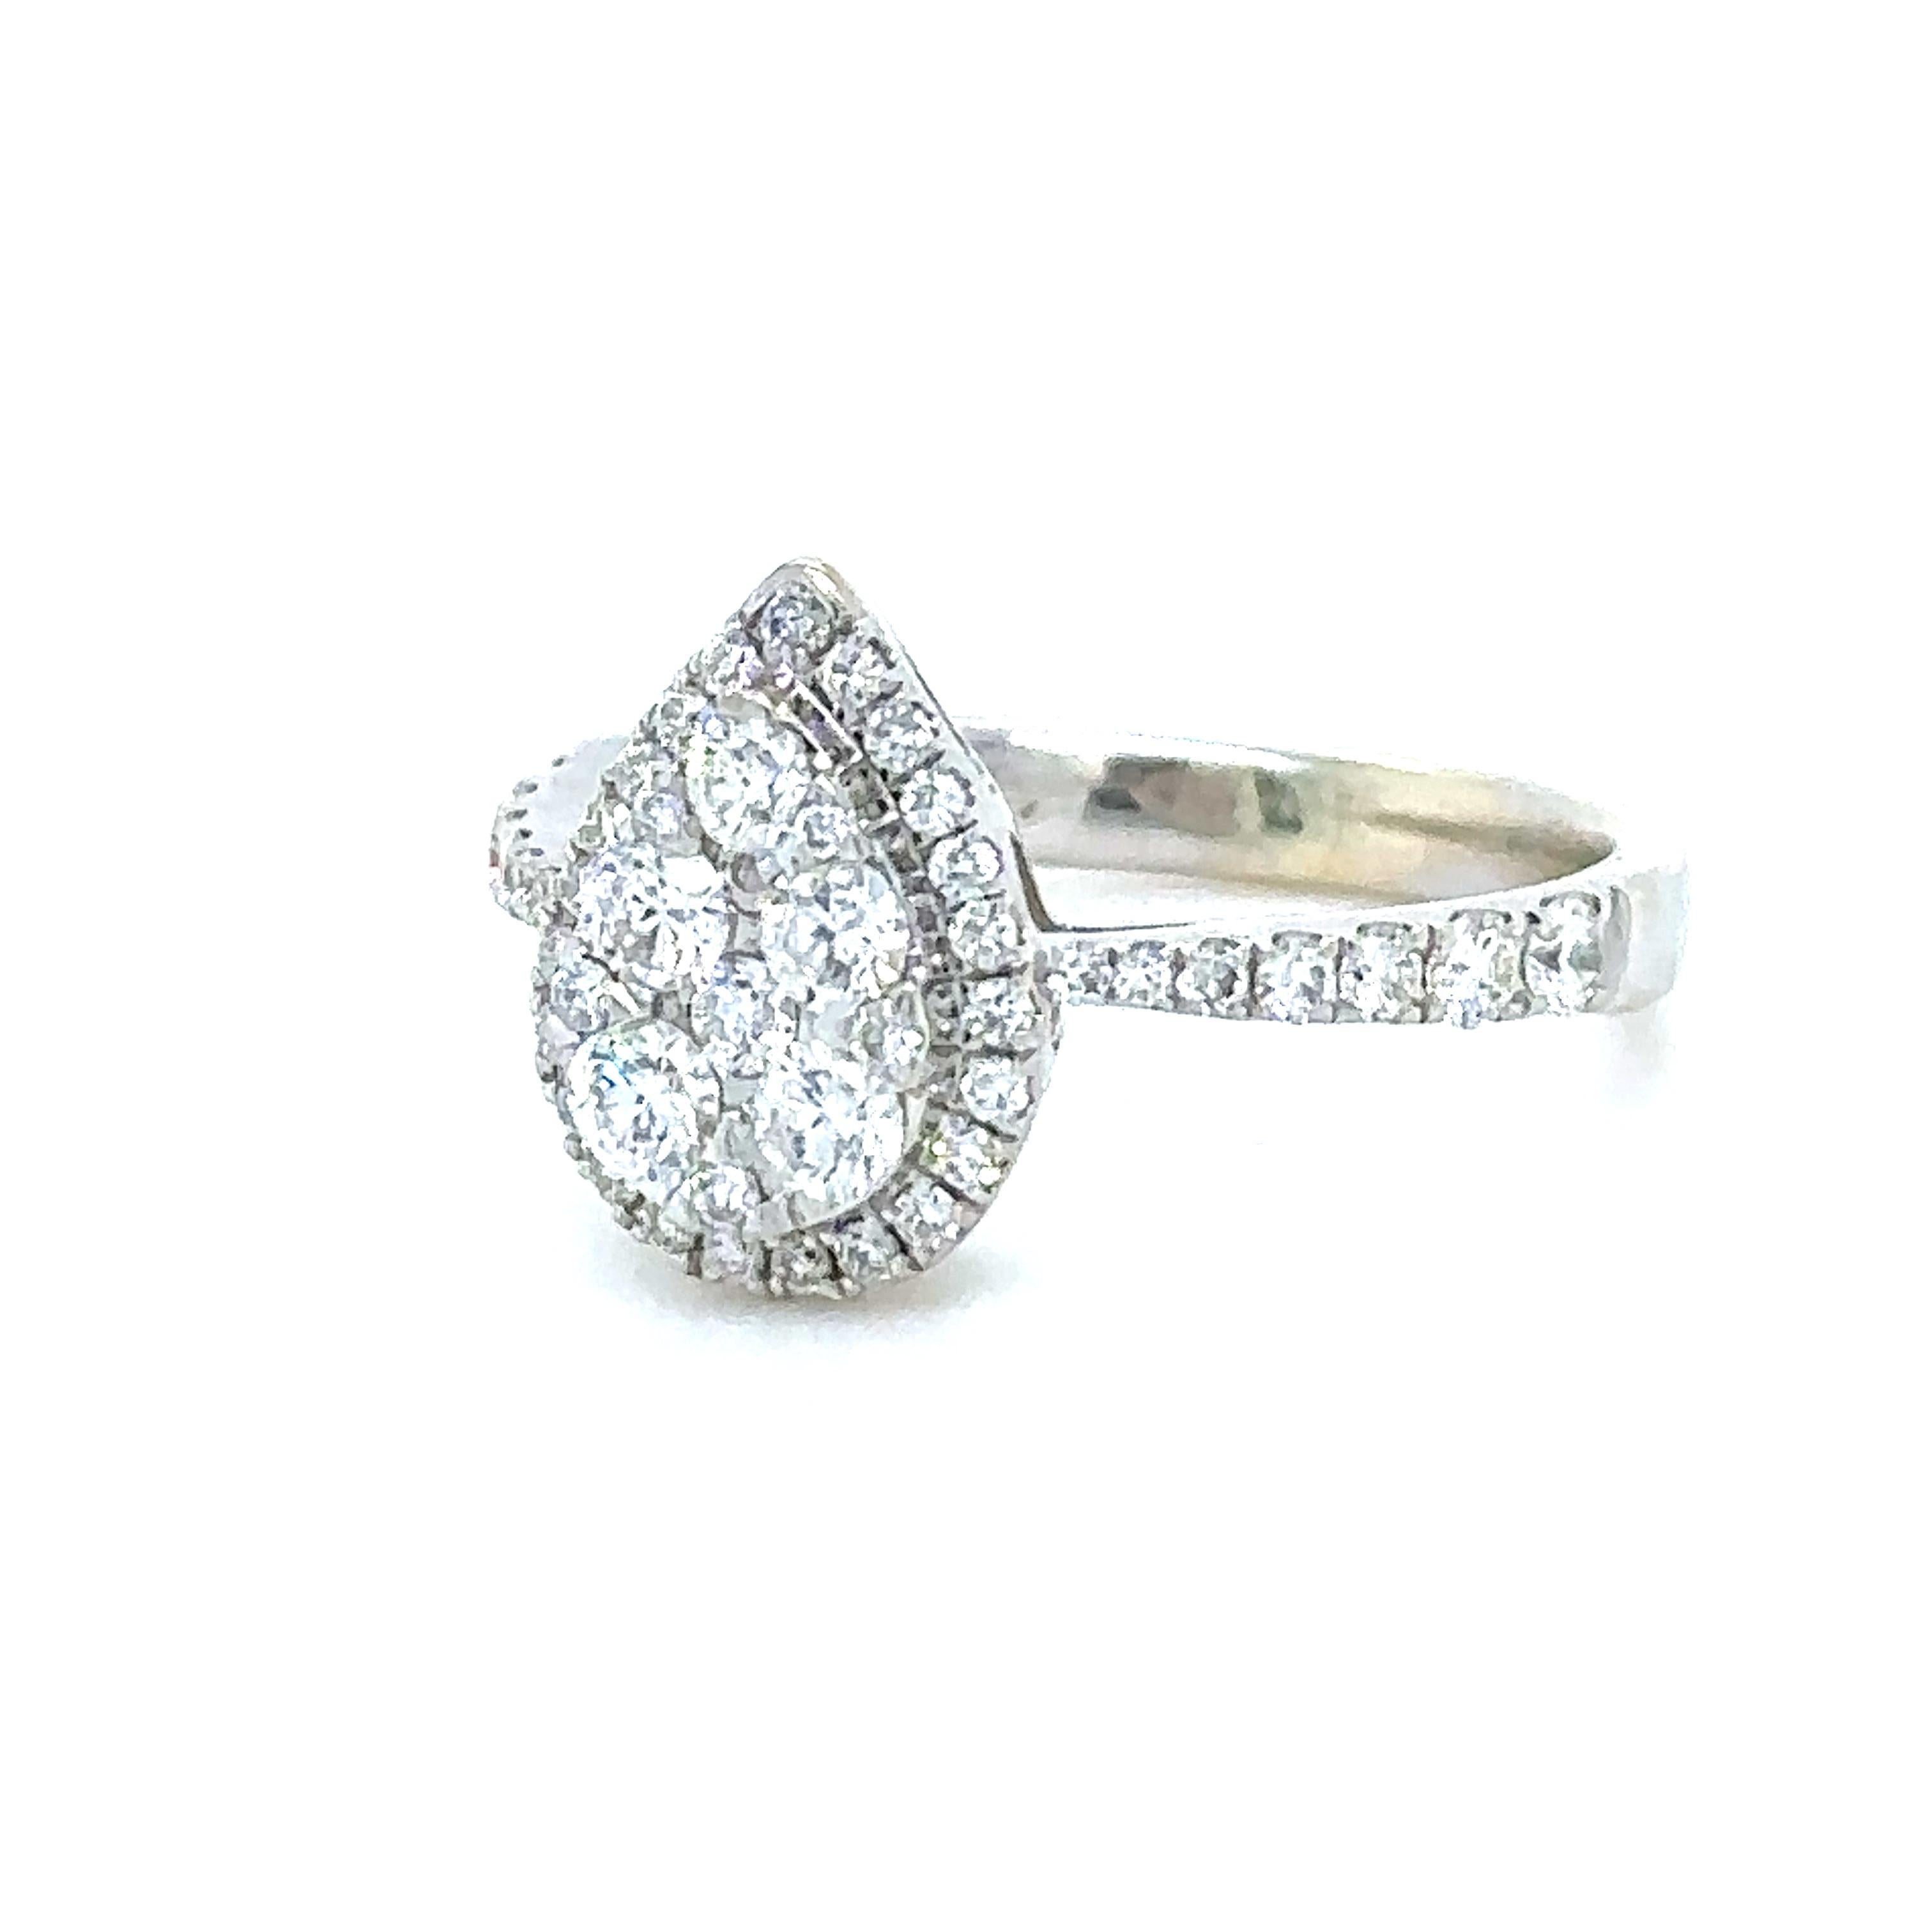 Unique features:

Bepsoke 18ct White Gold Pear Shaped Cluster designed ring featuring 49 diamonds with a total weight of .66ct. F Colour, VS Clarity.

Metal: 18ct White Gold
Carat: 0.66ct
Colour: F
Clarity: VS
Cut: Round Brilliant Cut
Weight: